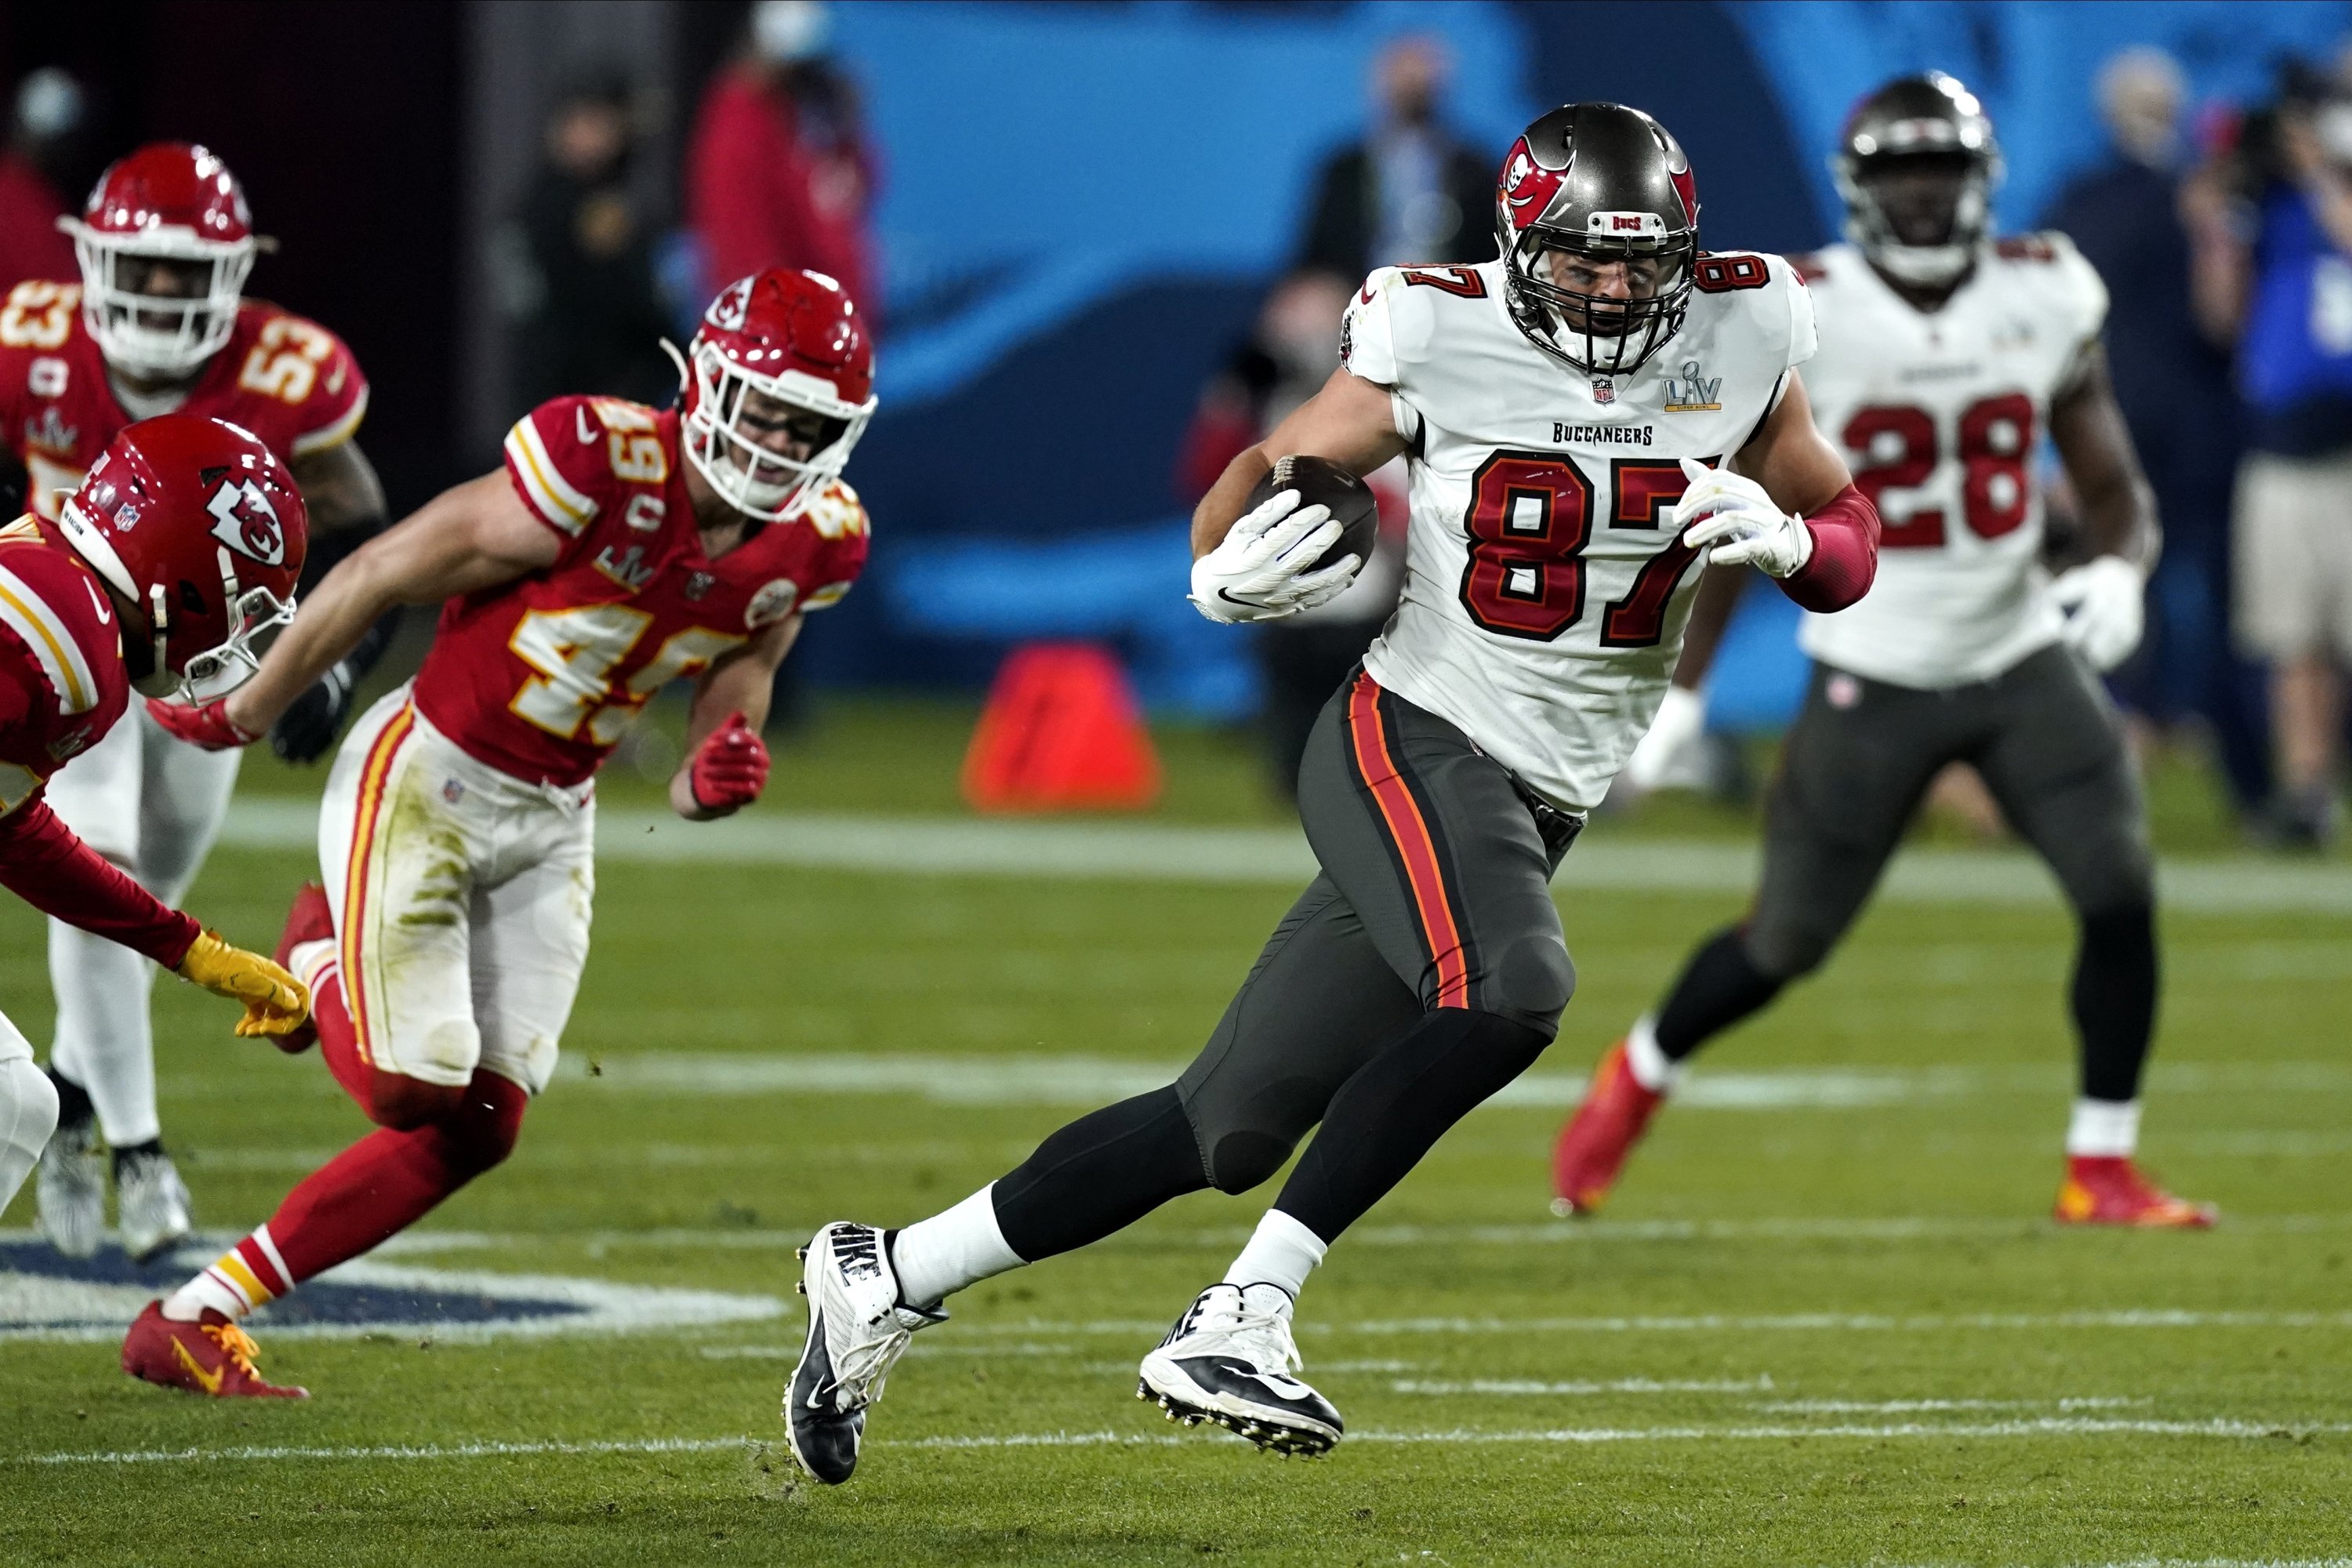 Tampa Bay Buccaneers tight end Rob Gronkowski (87) runbs against the Kansas City Chiefs during the second half of the NFL Super Bowl 55 football game Sunday, Feb. 7, 2021, in Tampa, Fla. (AP Photo)